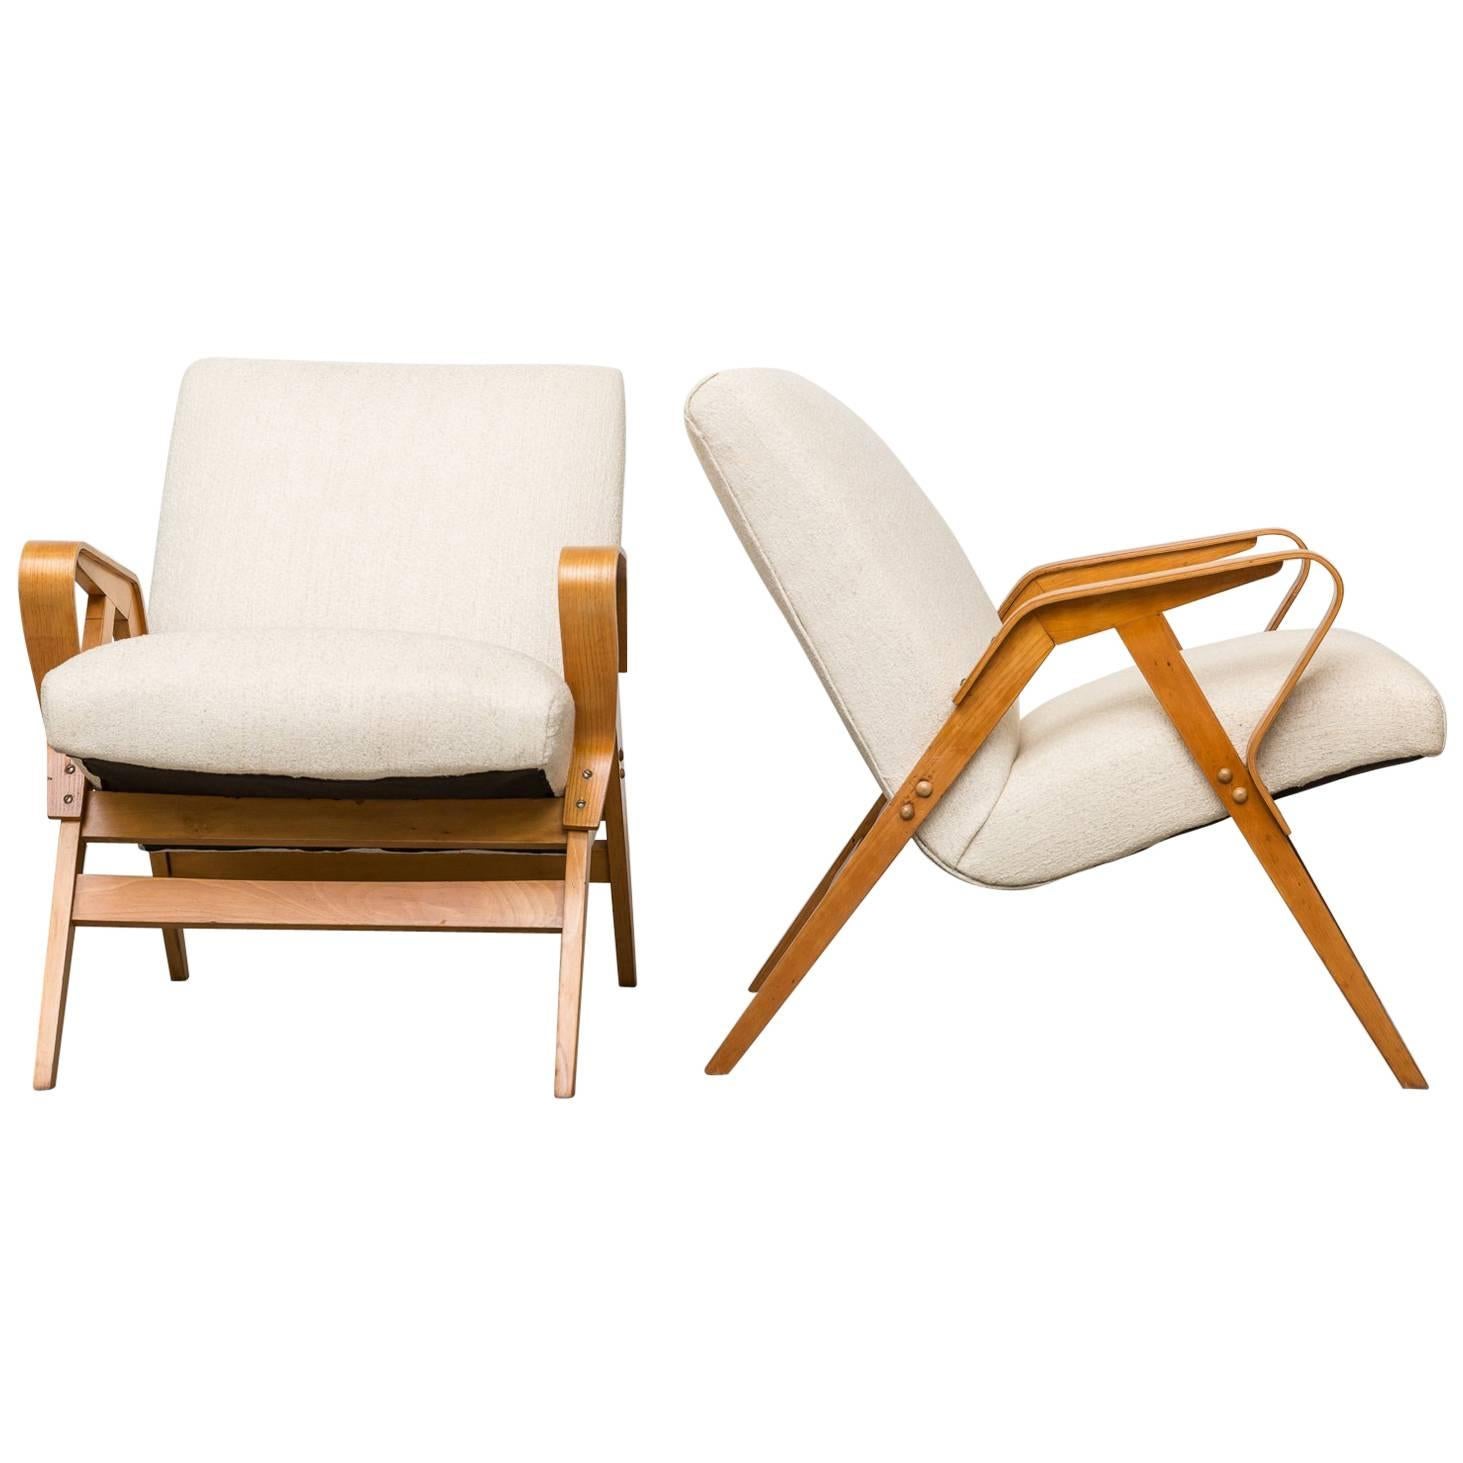 Pair of Czech Tatra Bent Plywood Lounge Chairs